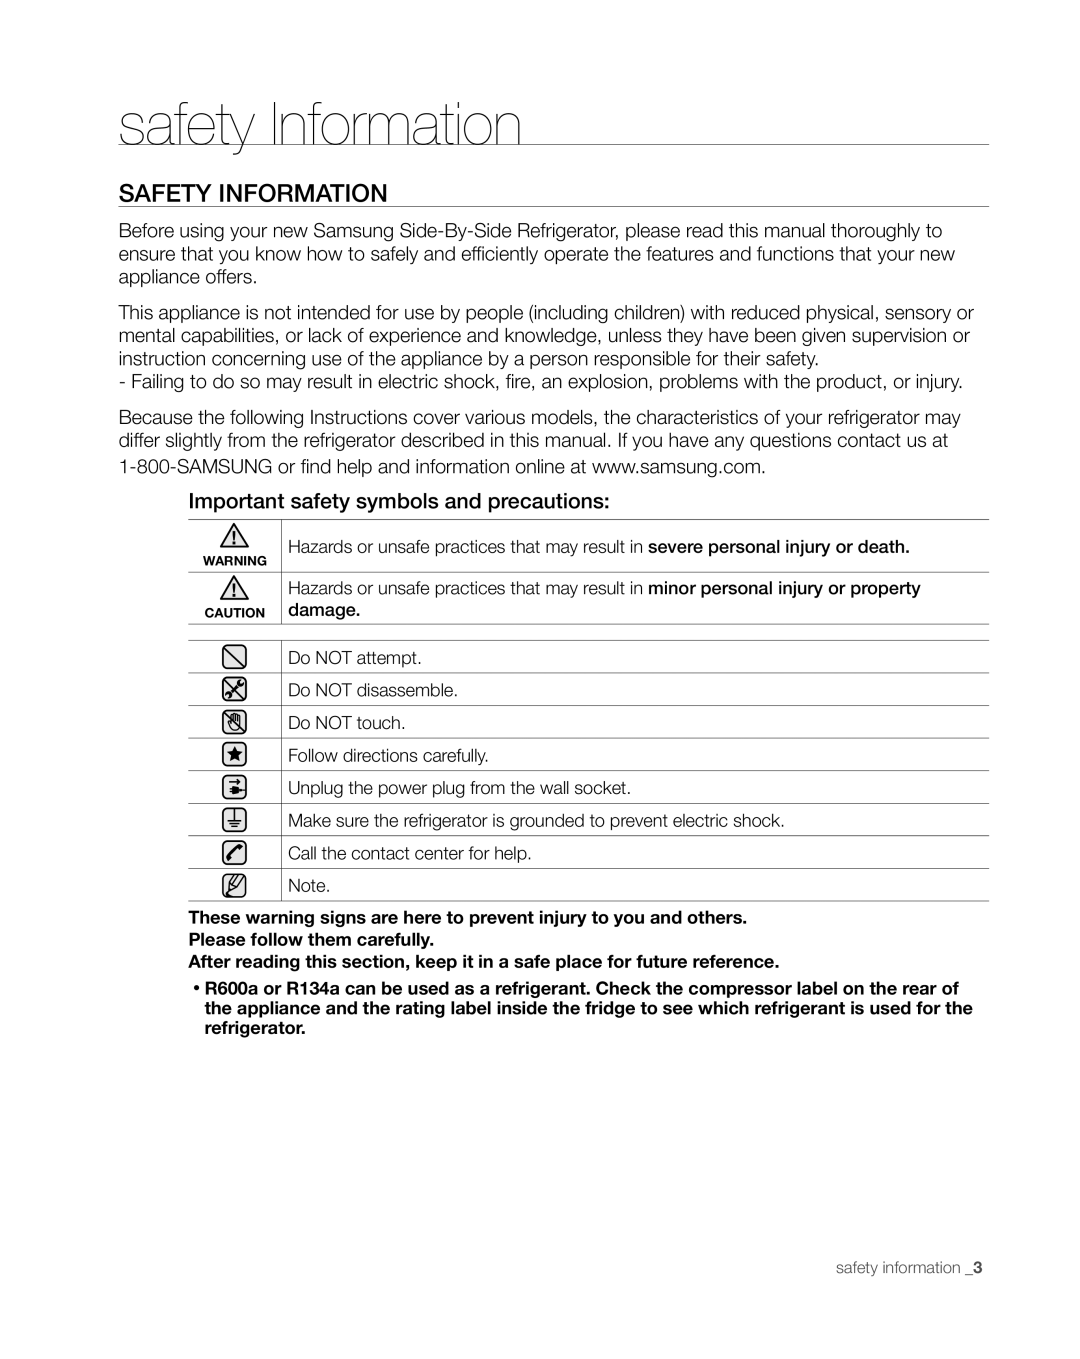 Samsung RS267TDWP, RS265TDWP user manual safety Information, Safety Information, Important safety symbols and precautions 